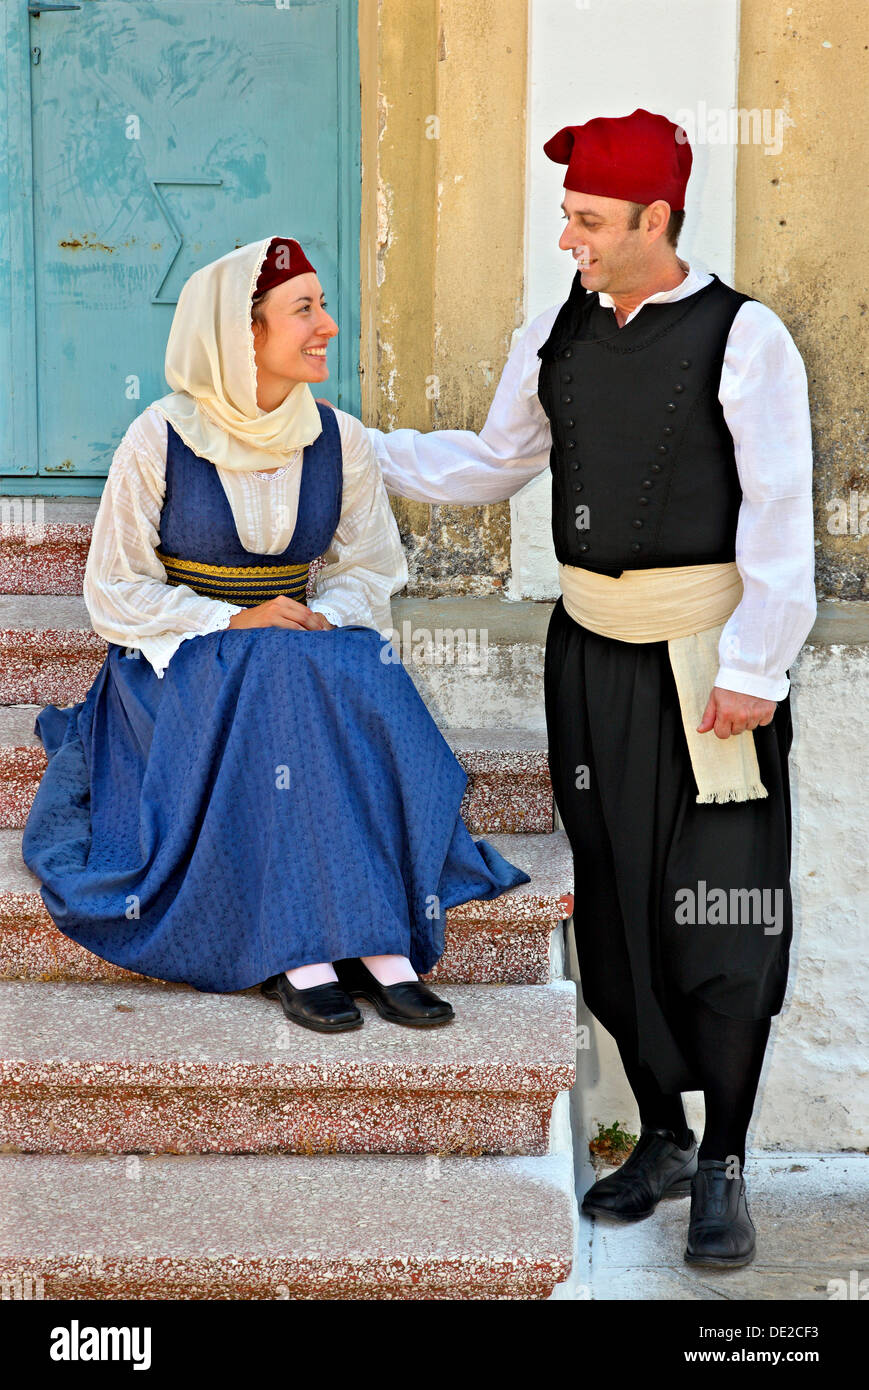 Young couple wearing traditional costumes in Palaio ('old') Karlovasi, Samos island, Greece. Stock Photo